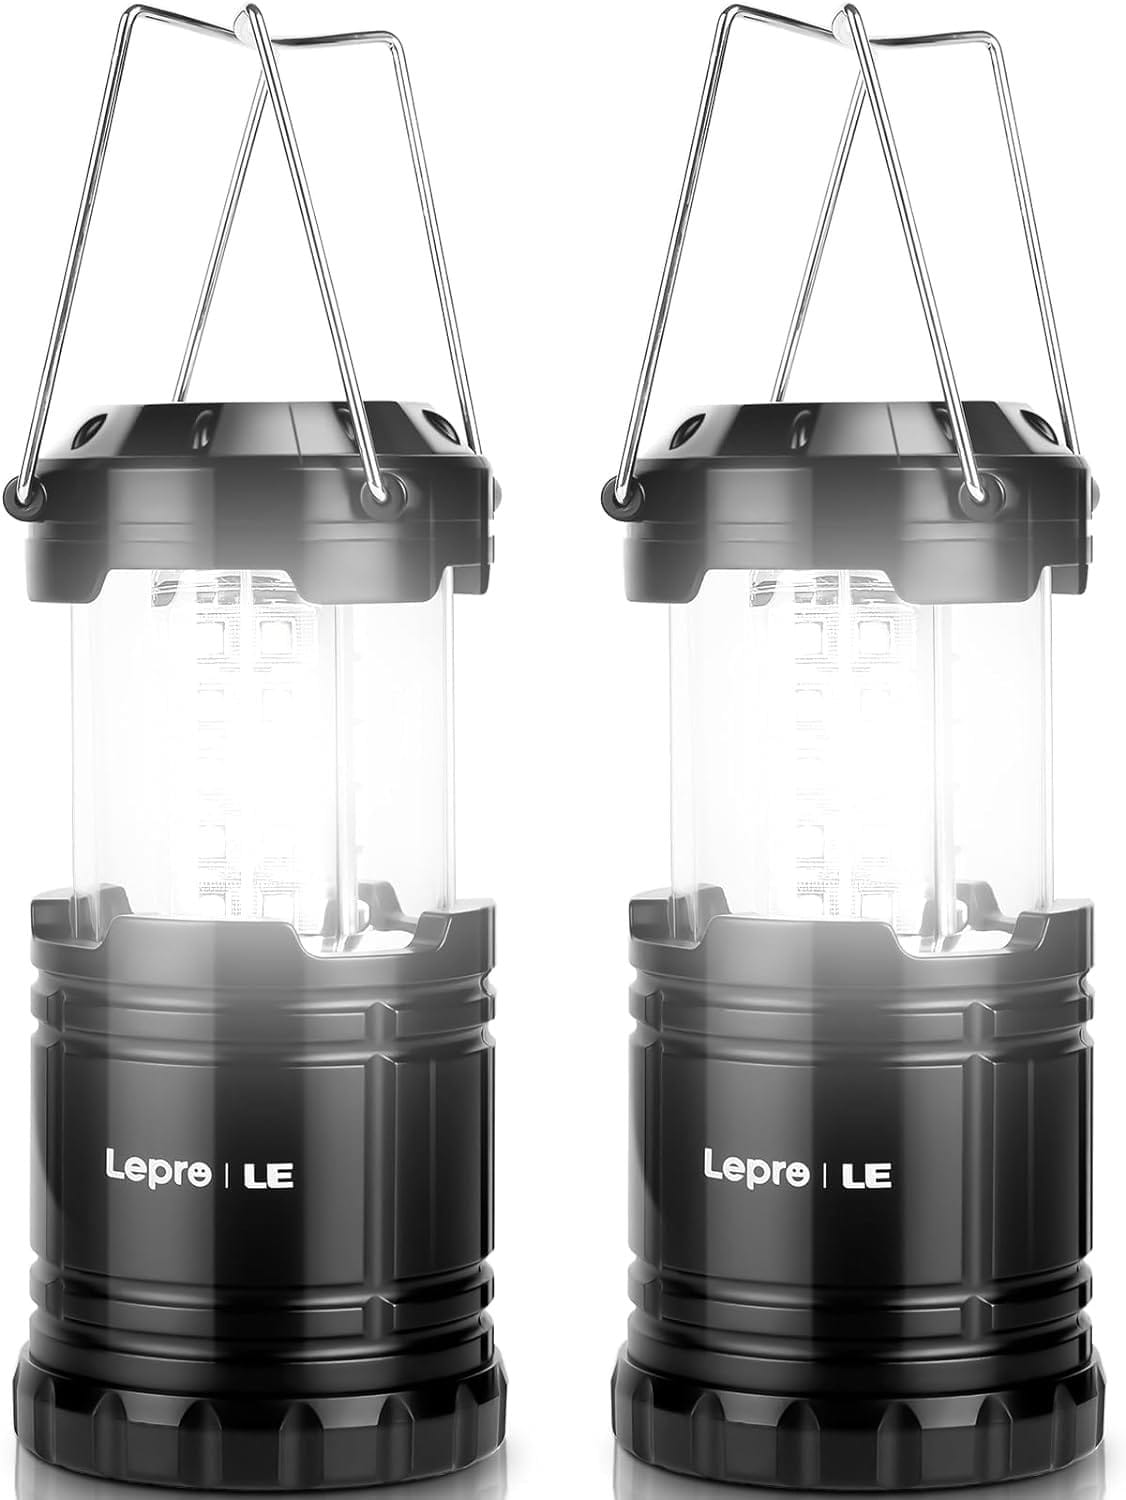 Lepro LED Camping Lanterns Battery Powered, Collapsible, IPX4 Water Resistant, Outdoor Portable Lights for Emergency, Hurricane, Storms and Outages